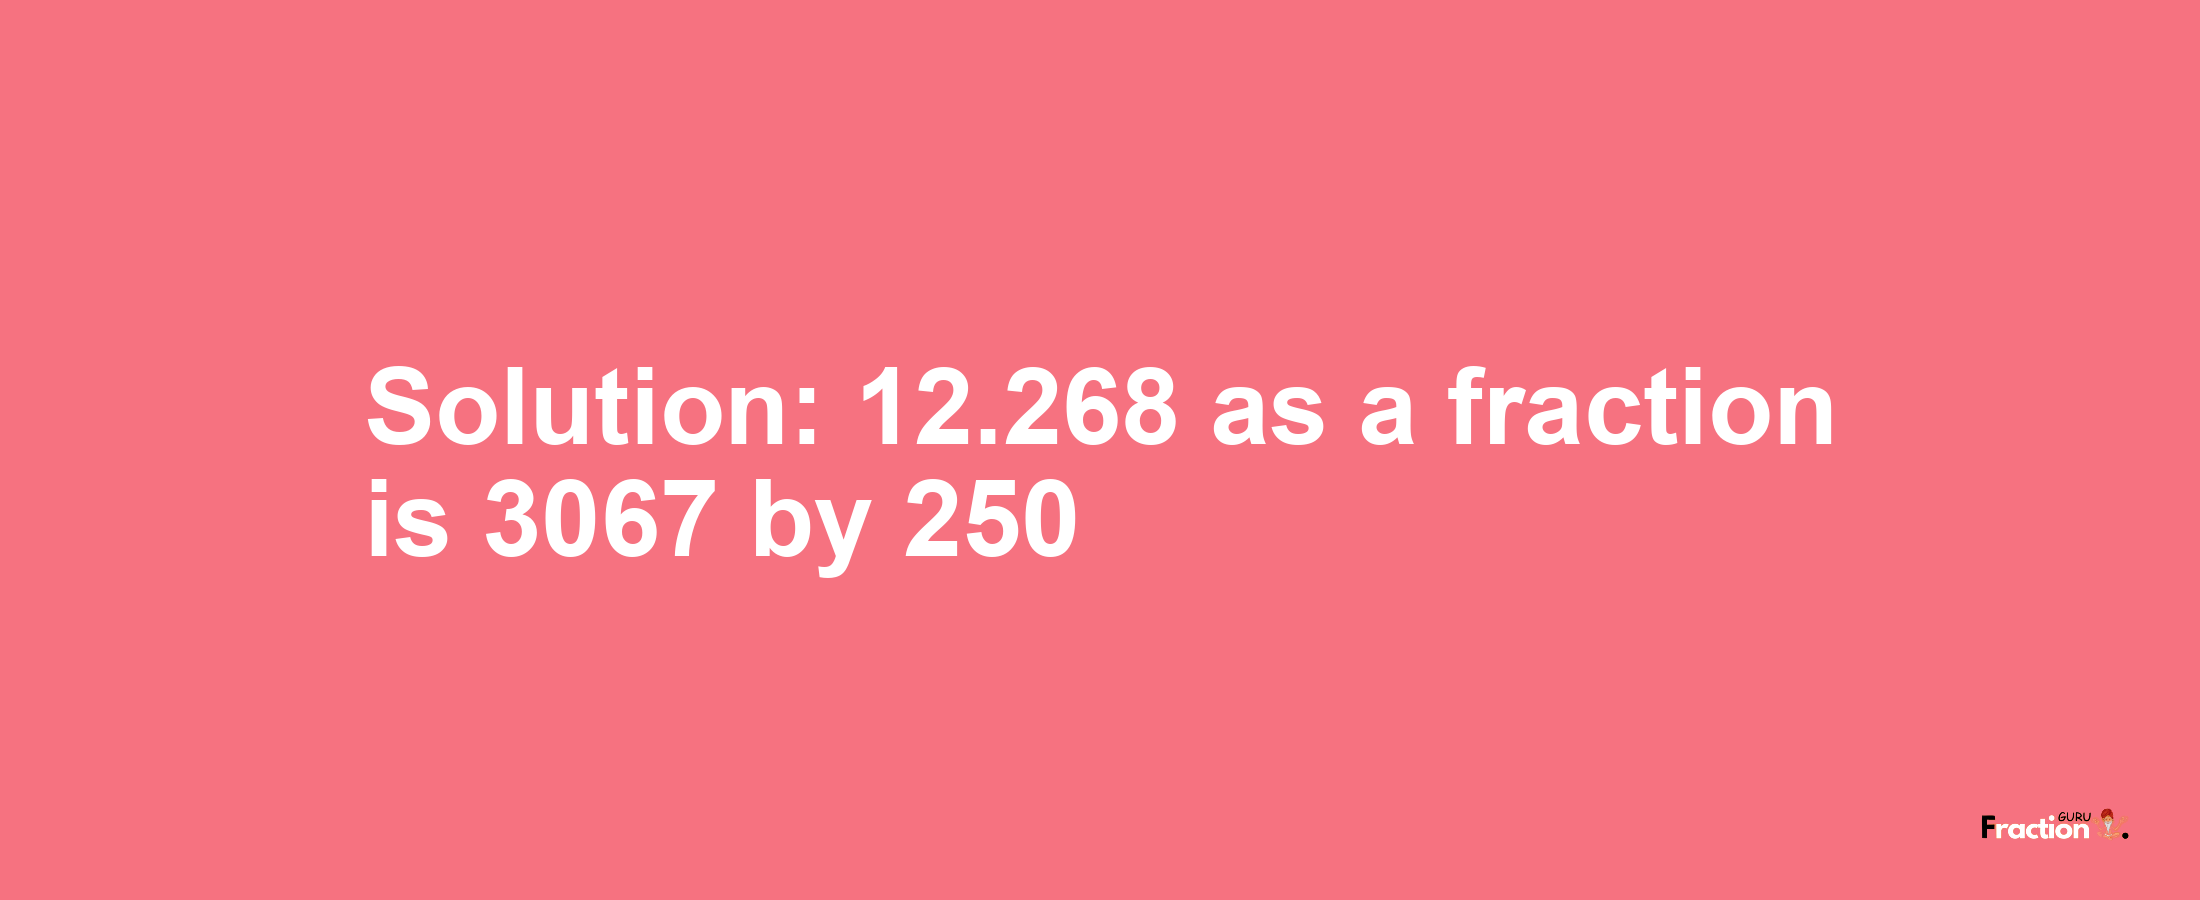 Solution:12.268 as a fraction is 3067/250